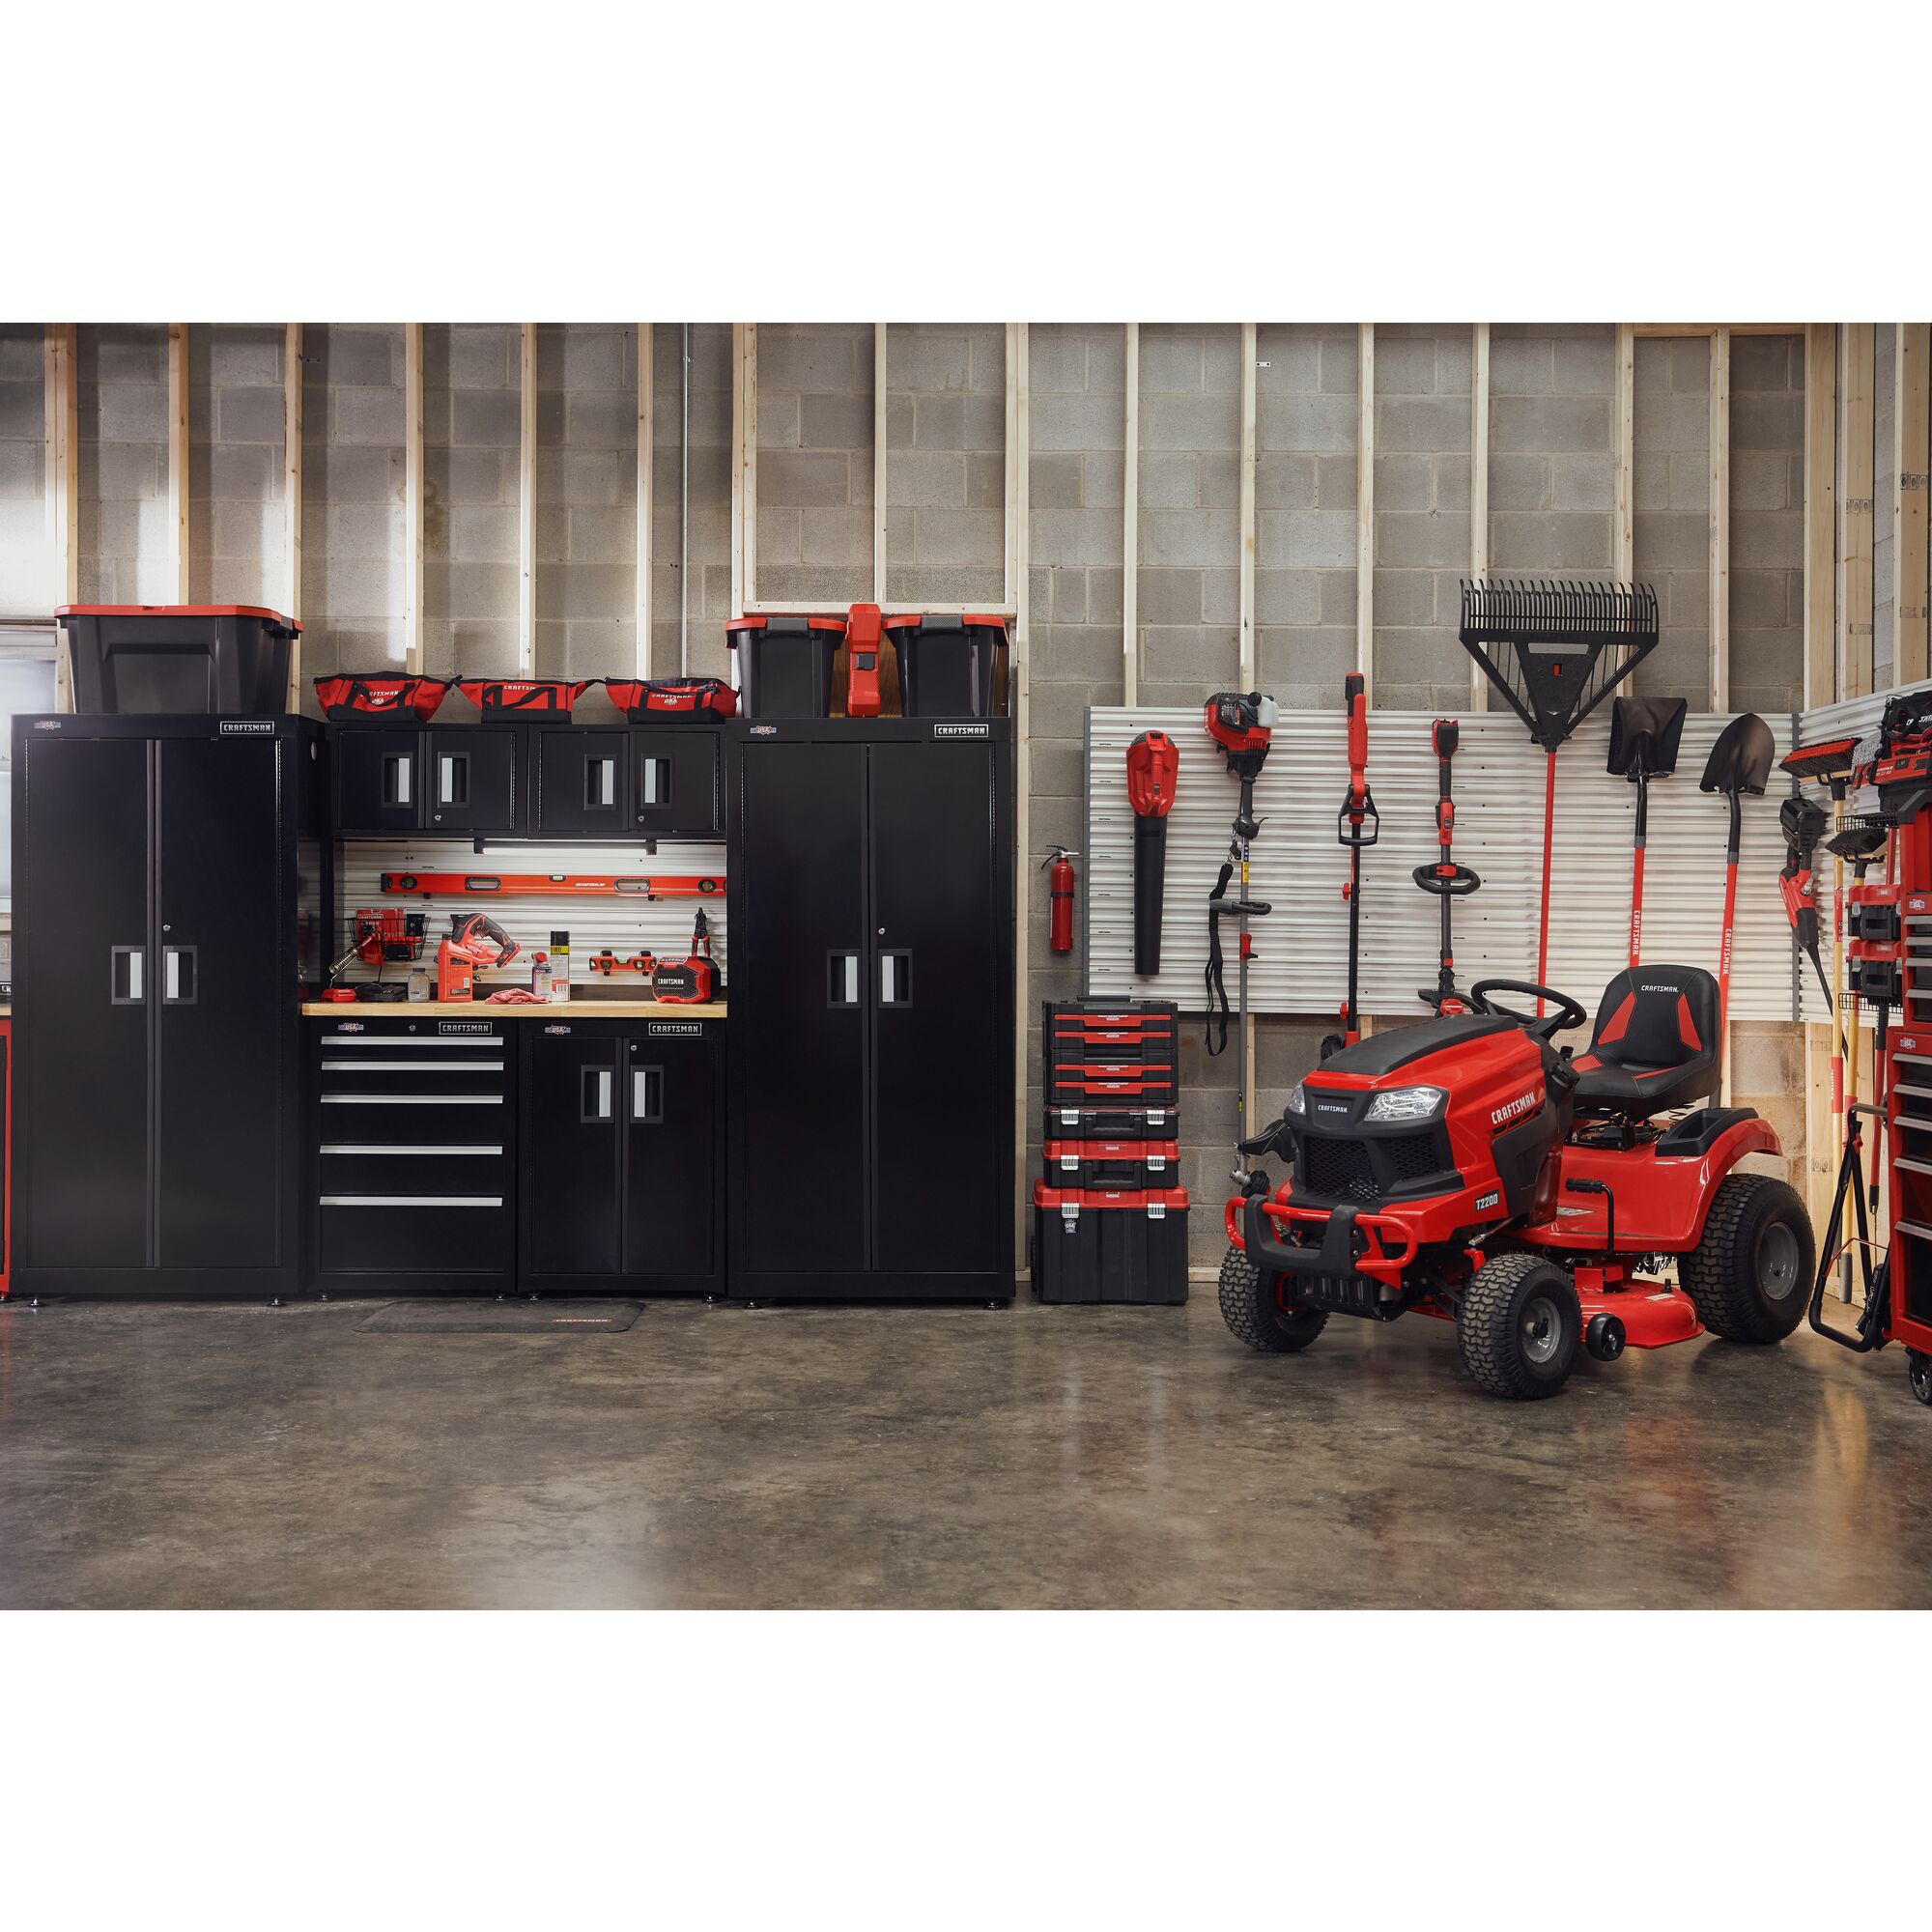 Garage filled with CRAFSTMAN outdoor, storage, and power tools